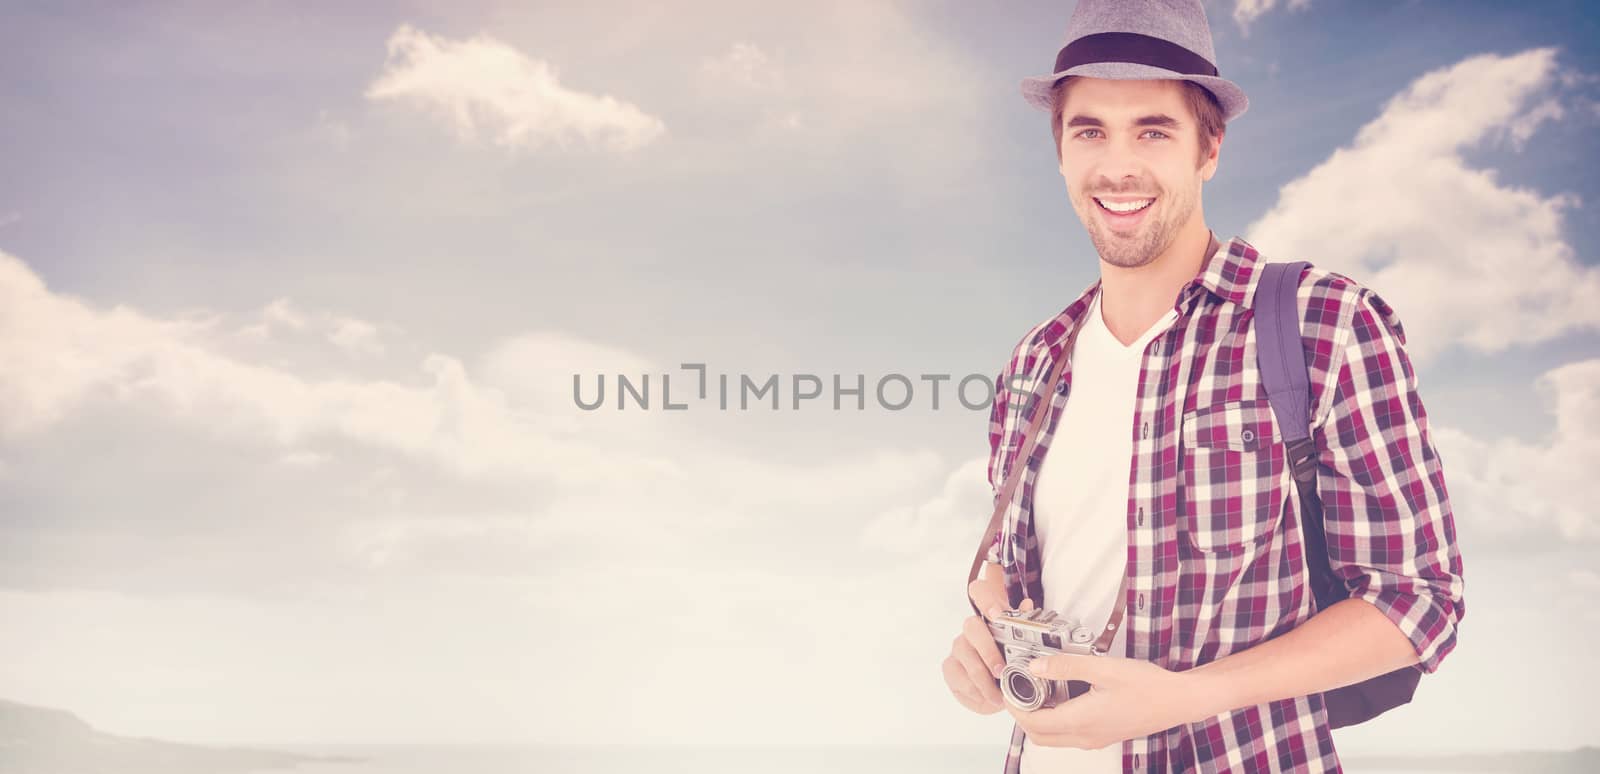 Portrait of man smiling while holding camera against beach